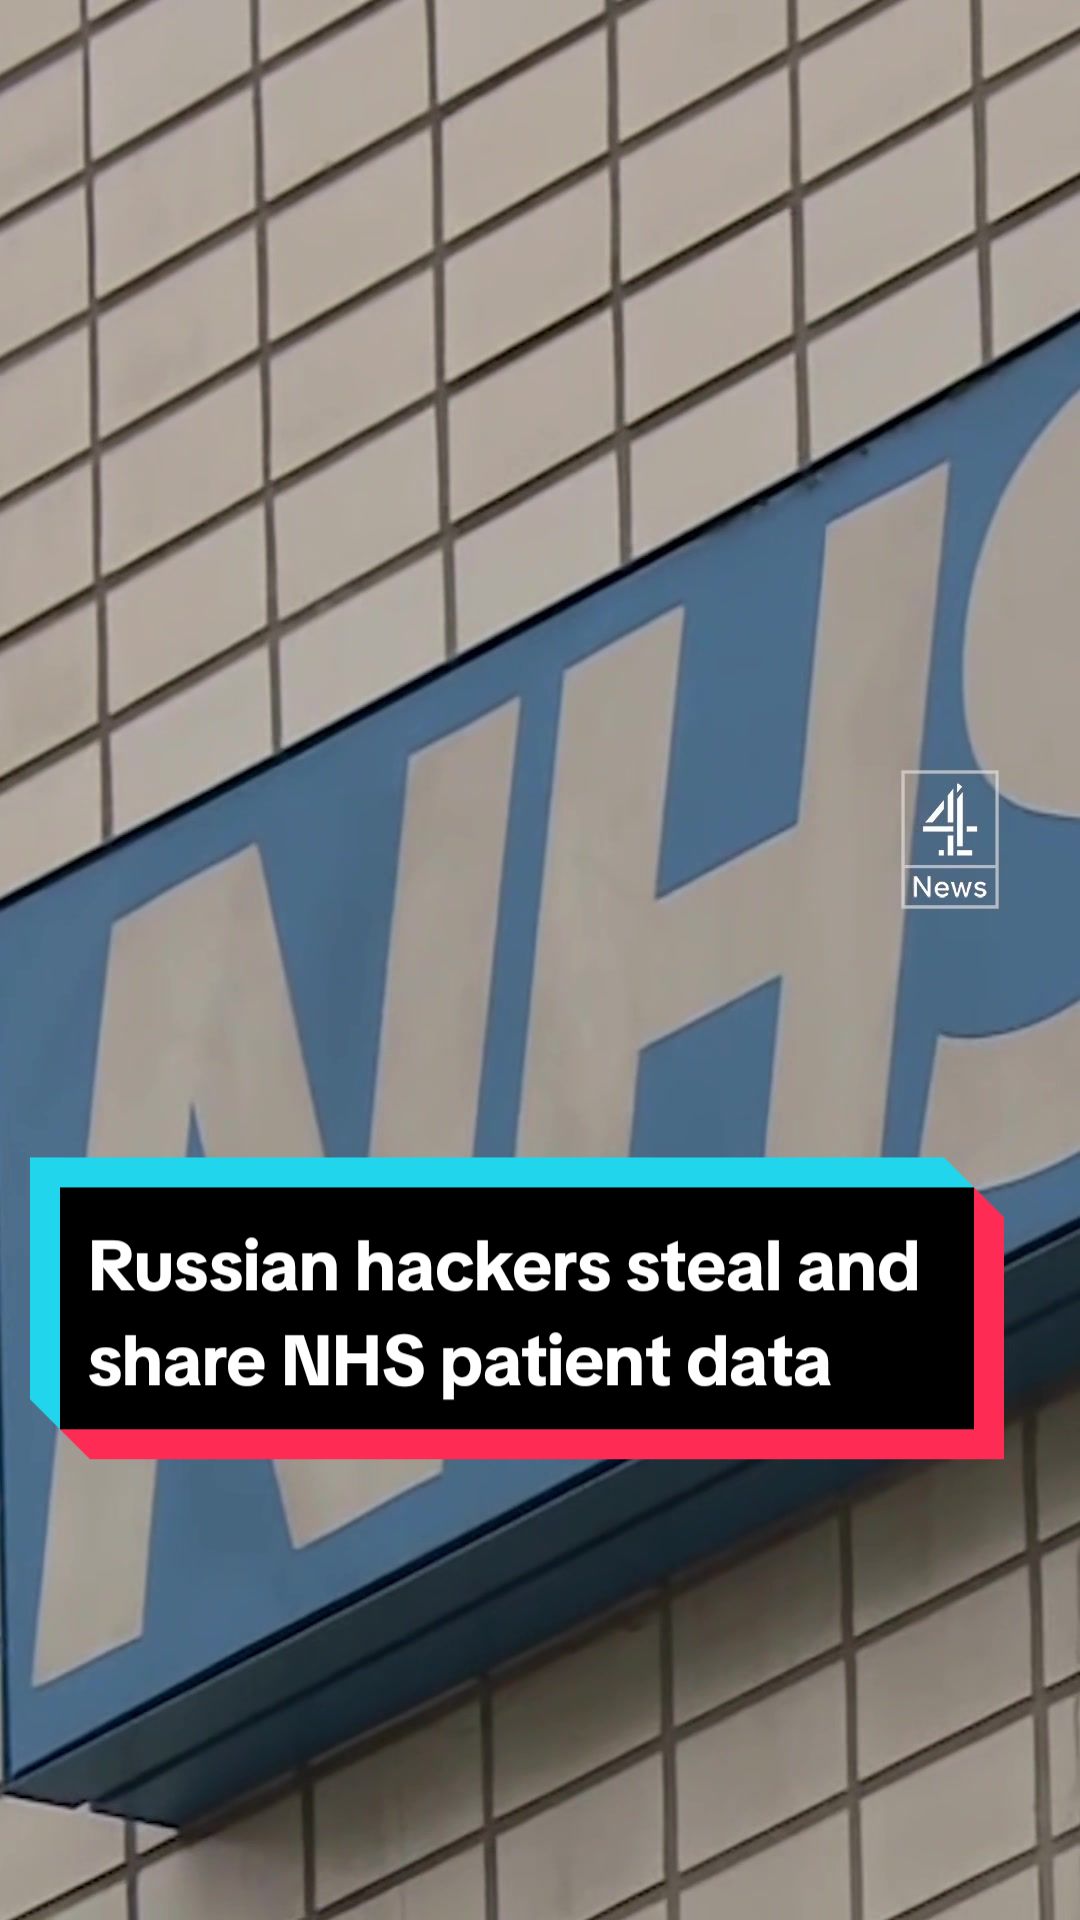 Russian hackers have released the private data of NHS patients at hospitals around London, in one of the UK's worst-ever cyber attacks.  It contains names, addresses, ages and blood information.  #NHS #London #Russia #Hacking #Hacker #Cyber #News #UkNews #C4News